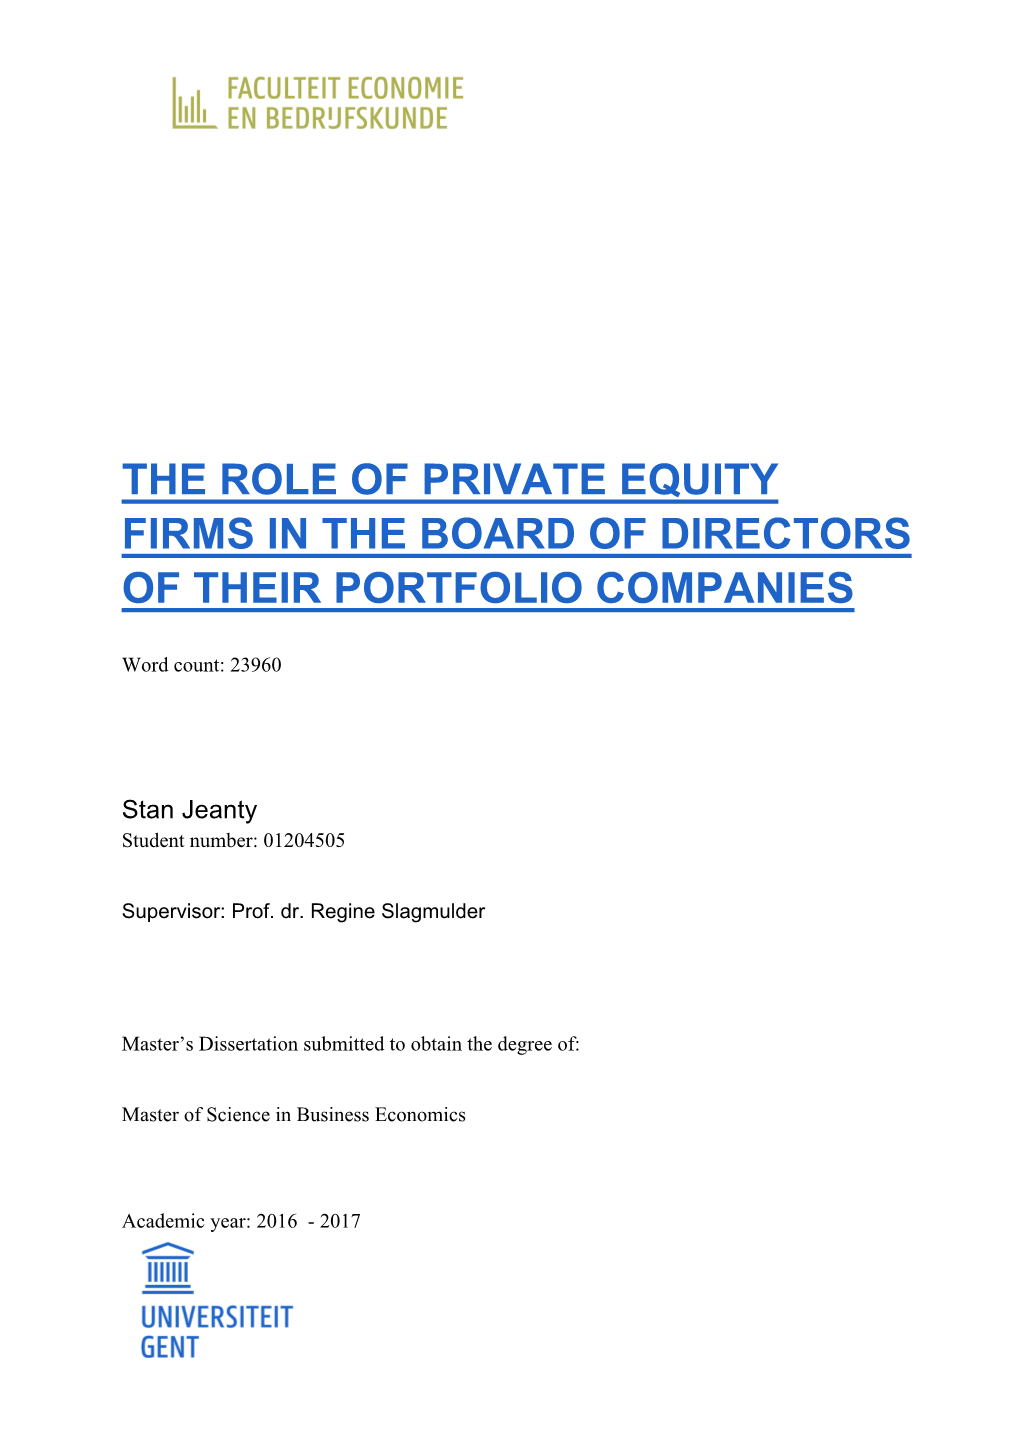 The Role of Private Equity Firms in the Board of Directors of Their Portfolio Companies